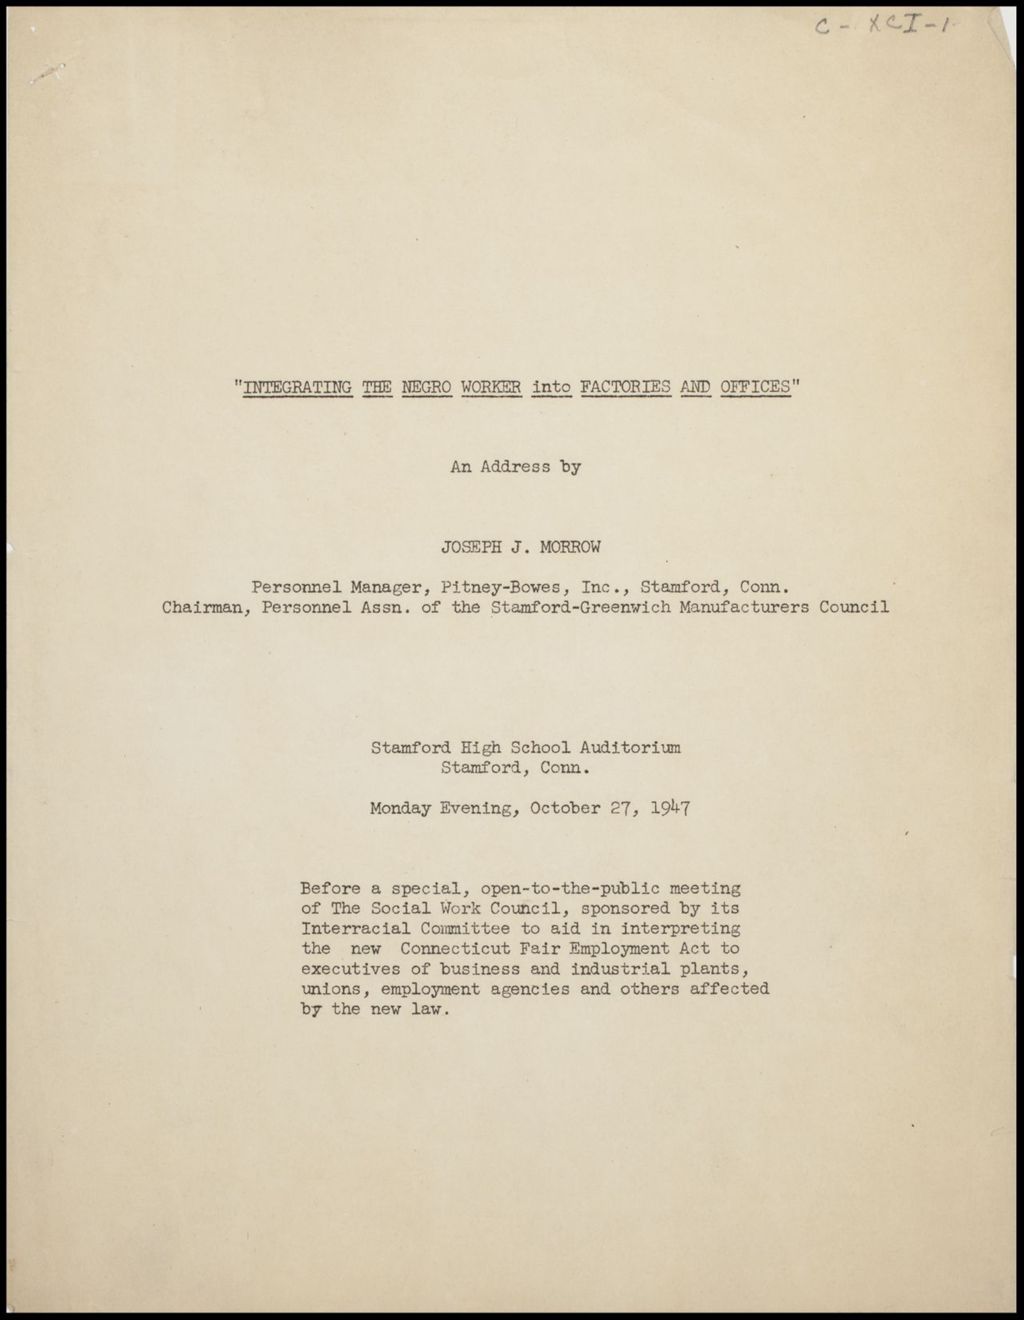 National Administrative and Clerical Council Reports, 1948-1955 (Folder III-2447)